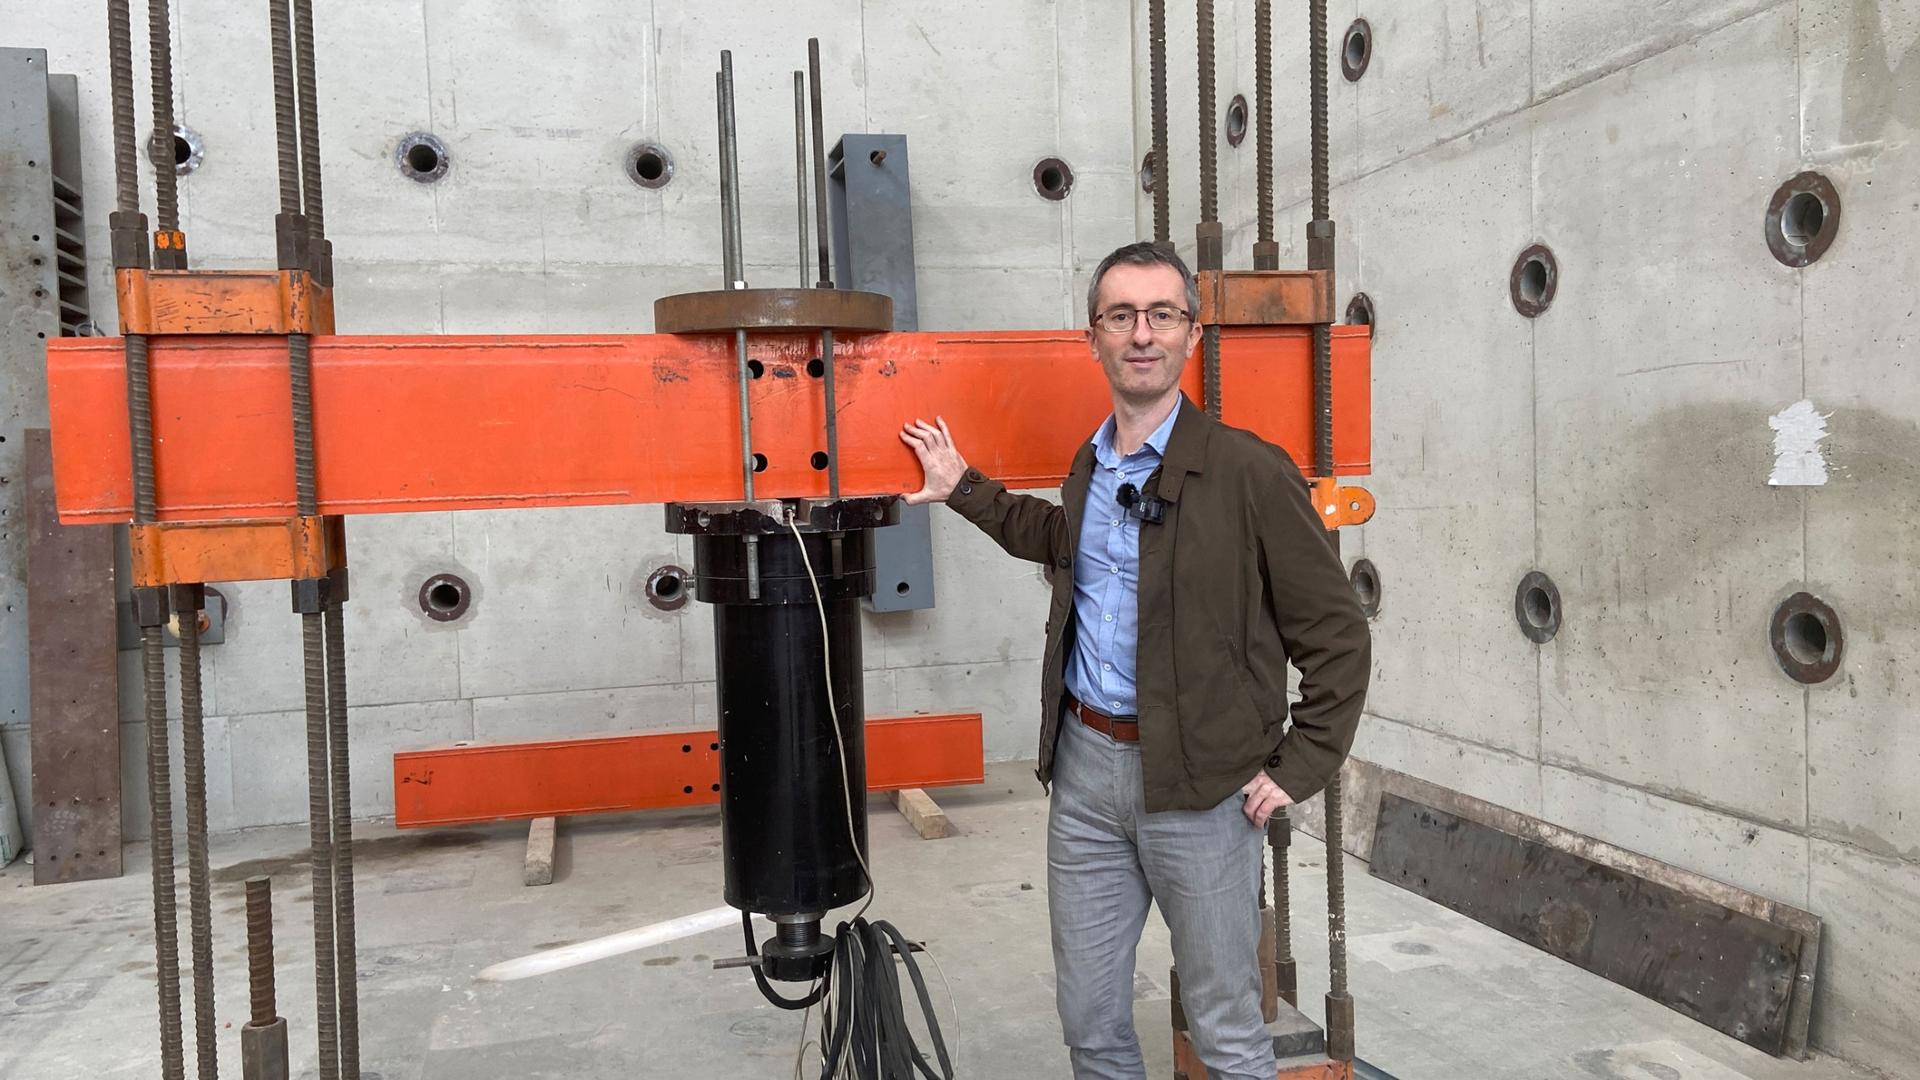 Dr. José M. Adam, chief researcher at the Institute of Science and Concrete Technology, stands next to a hydraulic jack capable of applying tons of load pressure on simulated bridges and buildings. 